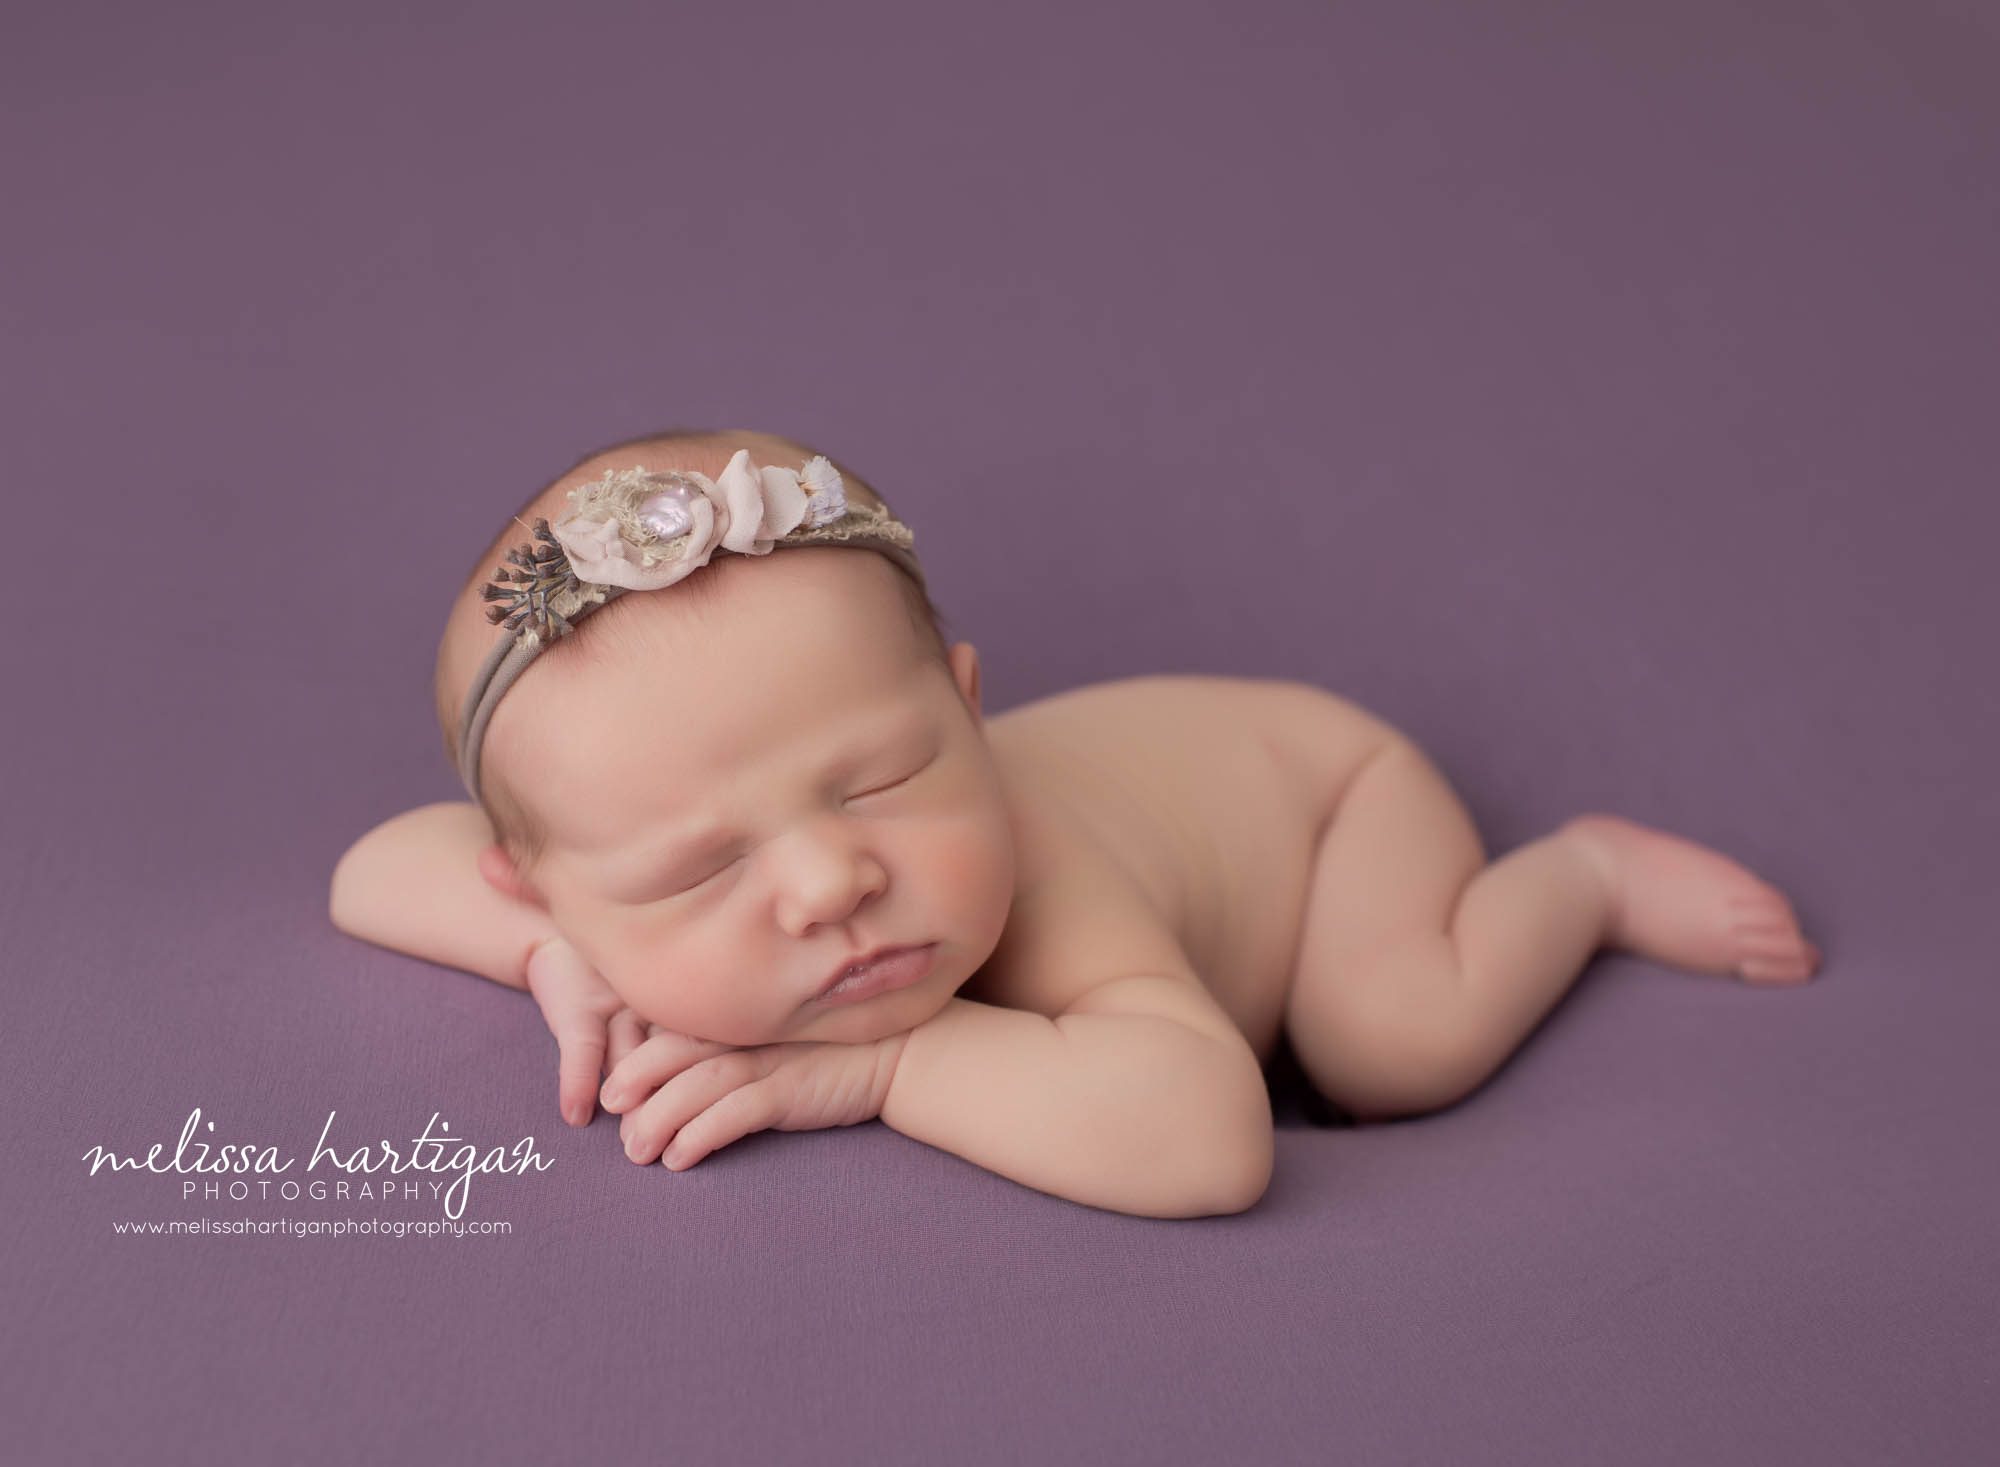 newborn baby girl posed on side with chin on hands laying on her side with pretty girly headband newborn photographer Connecticut